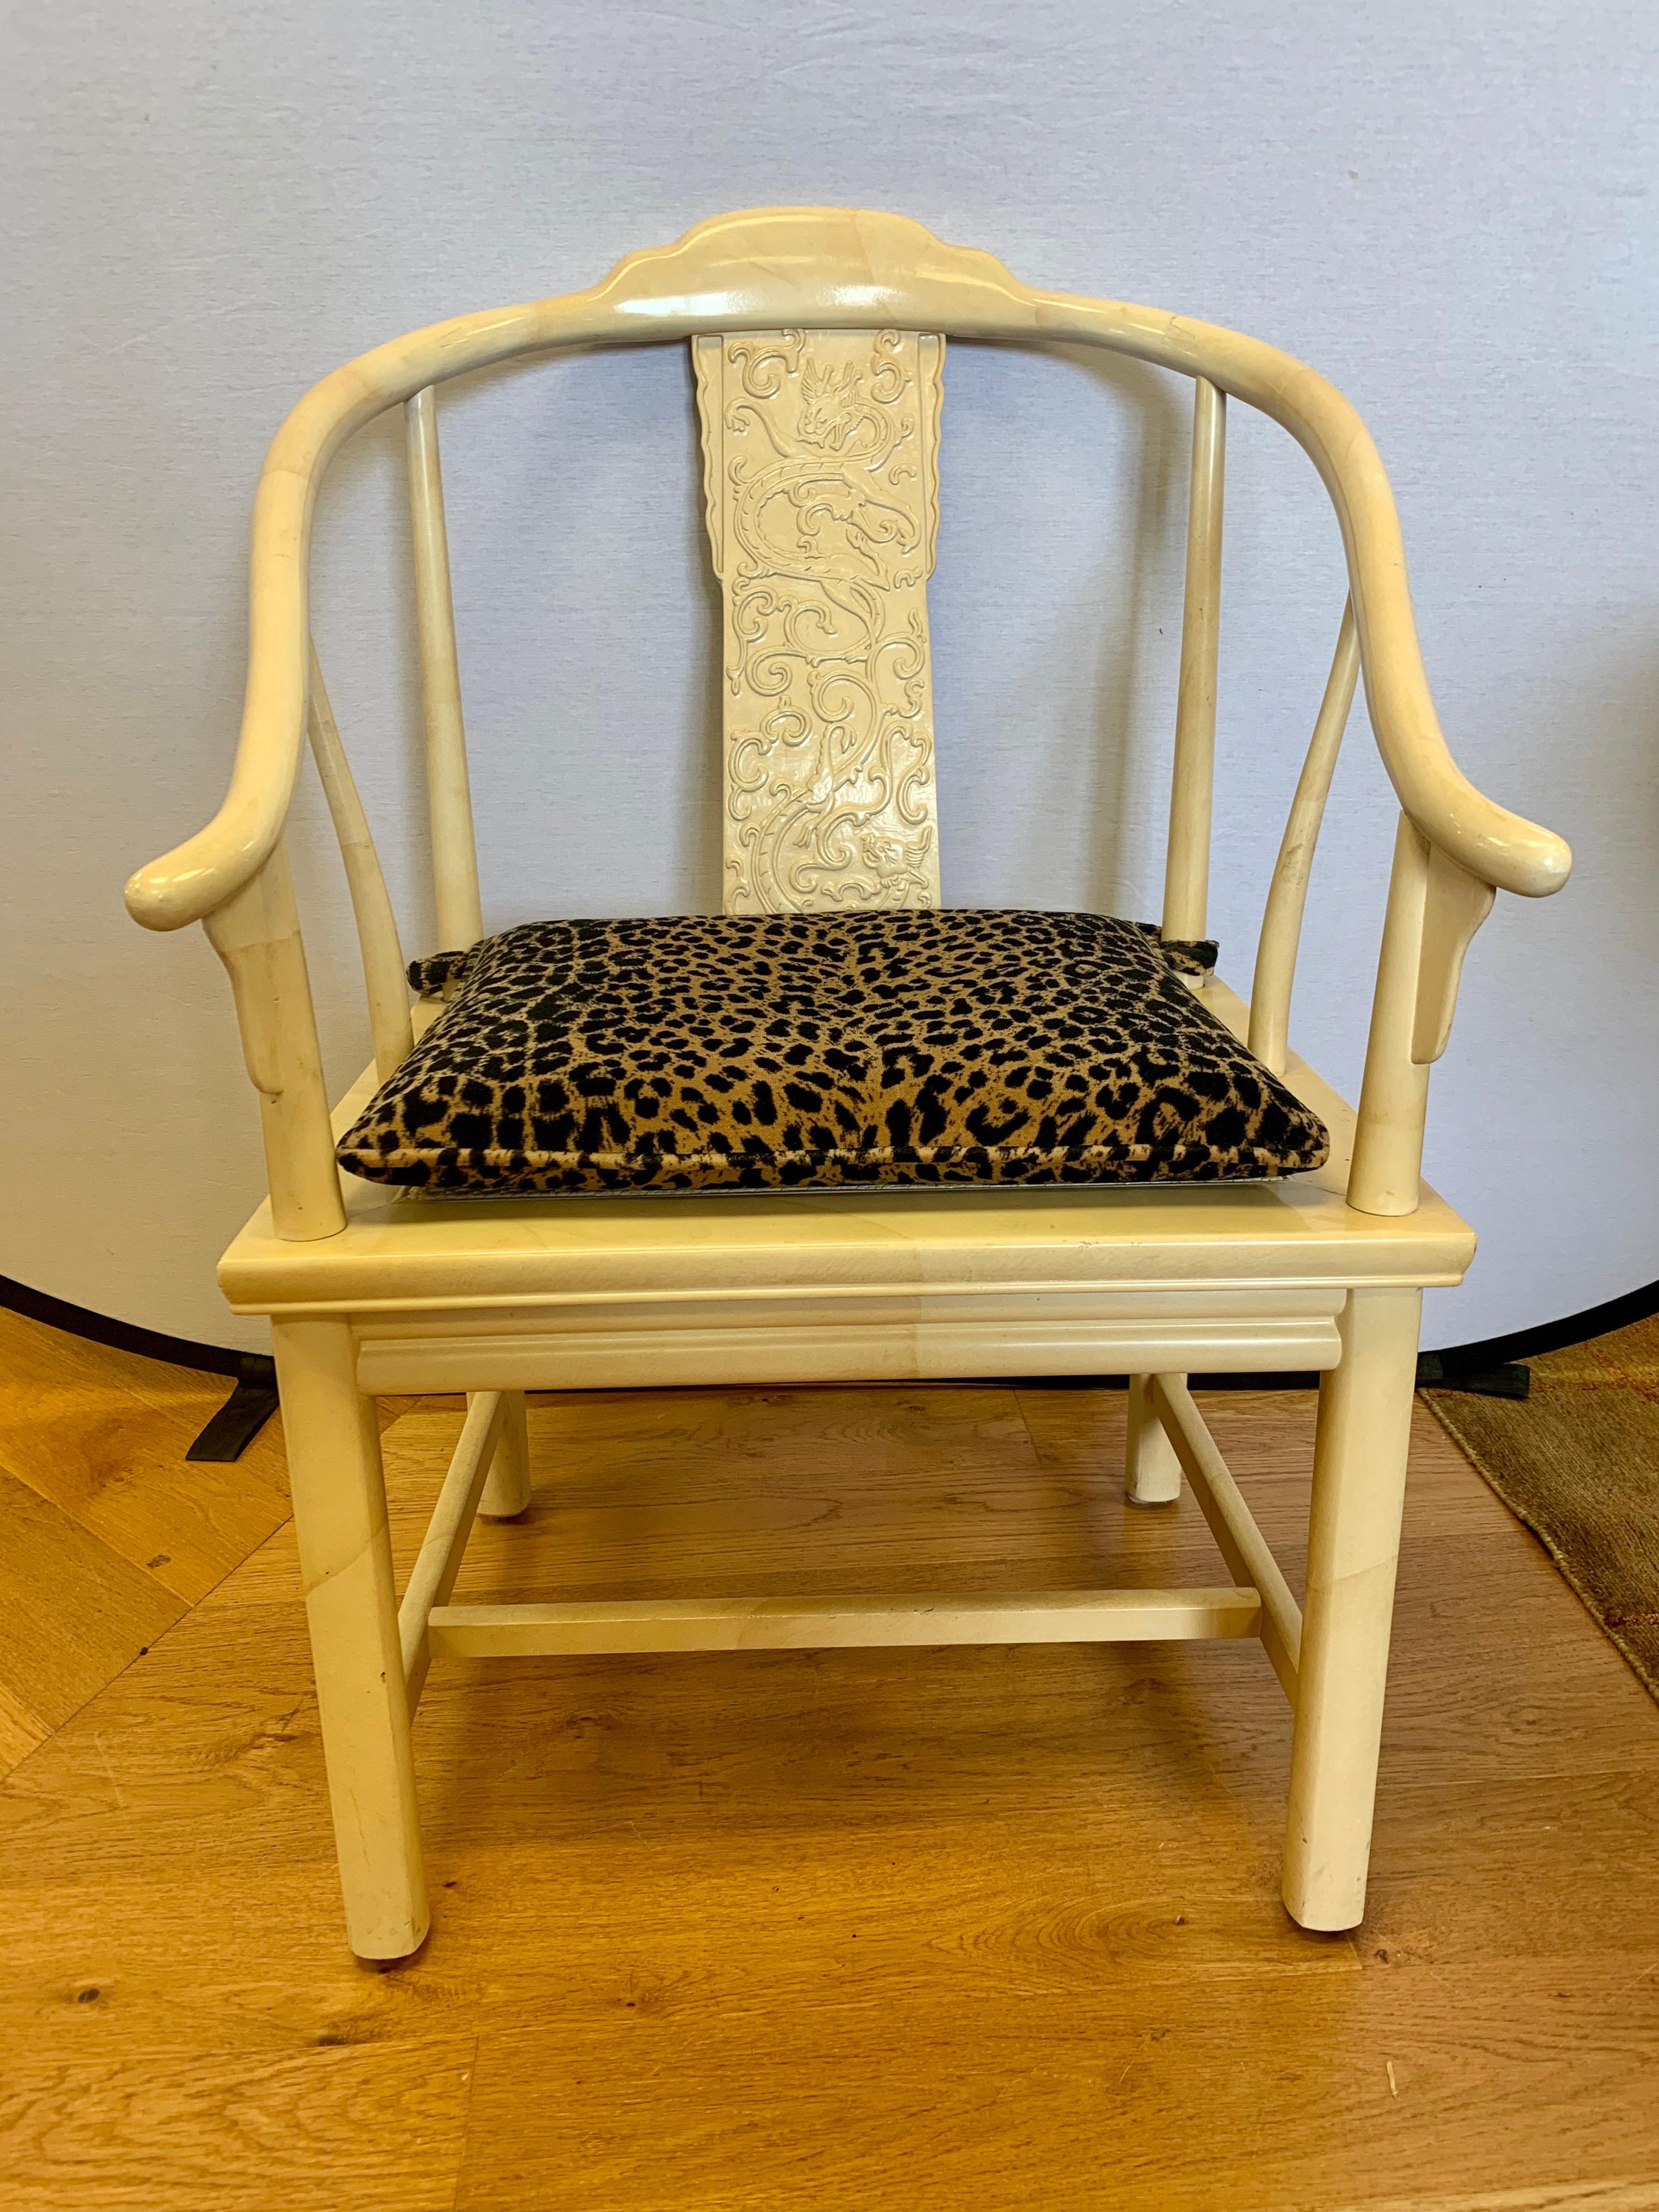 Elegant James Mont style horseshoe chair by Henredon. This one features not only gorgeous cane seat but also a custom leopard set cushion. All manufacturer hallmarks are at bottom. This chair is fully lacquered throughout in a color best described